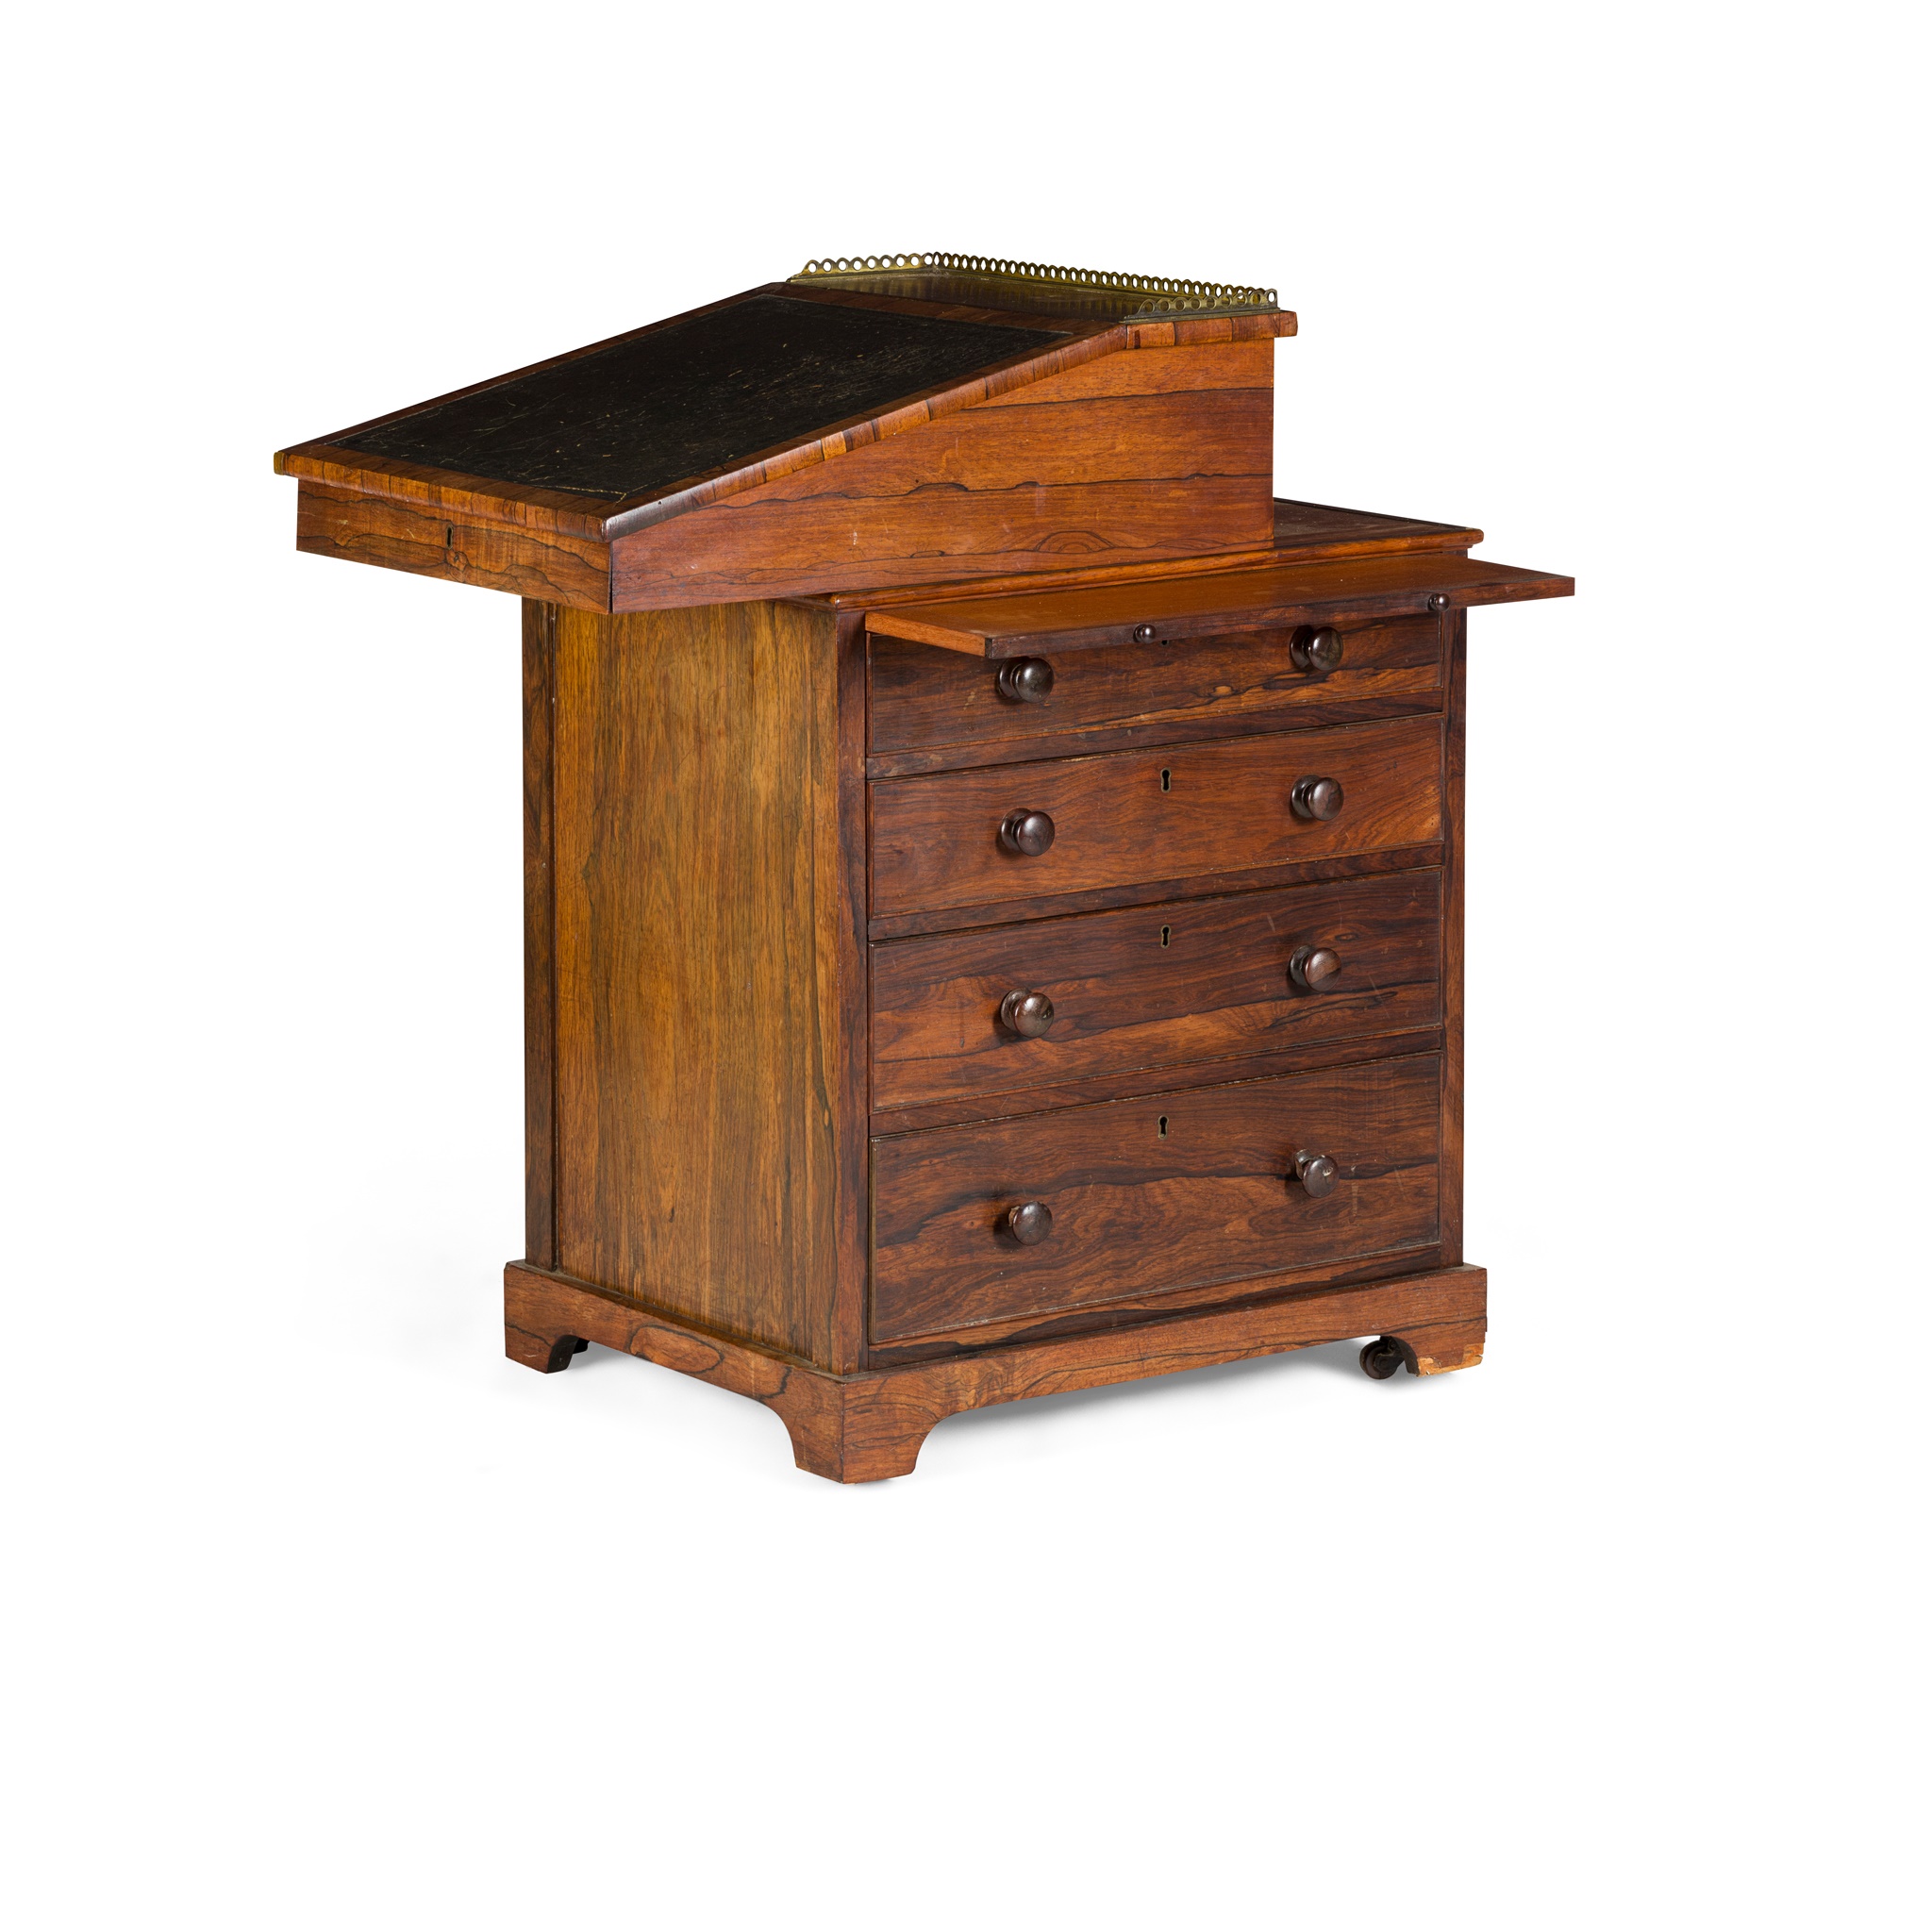 Y REGENCY ROSEWOOD DAVENPORT, IN THE MANNER OF GILLOWS EARLY 19TH CENTURY - Image 2 of 2